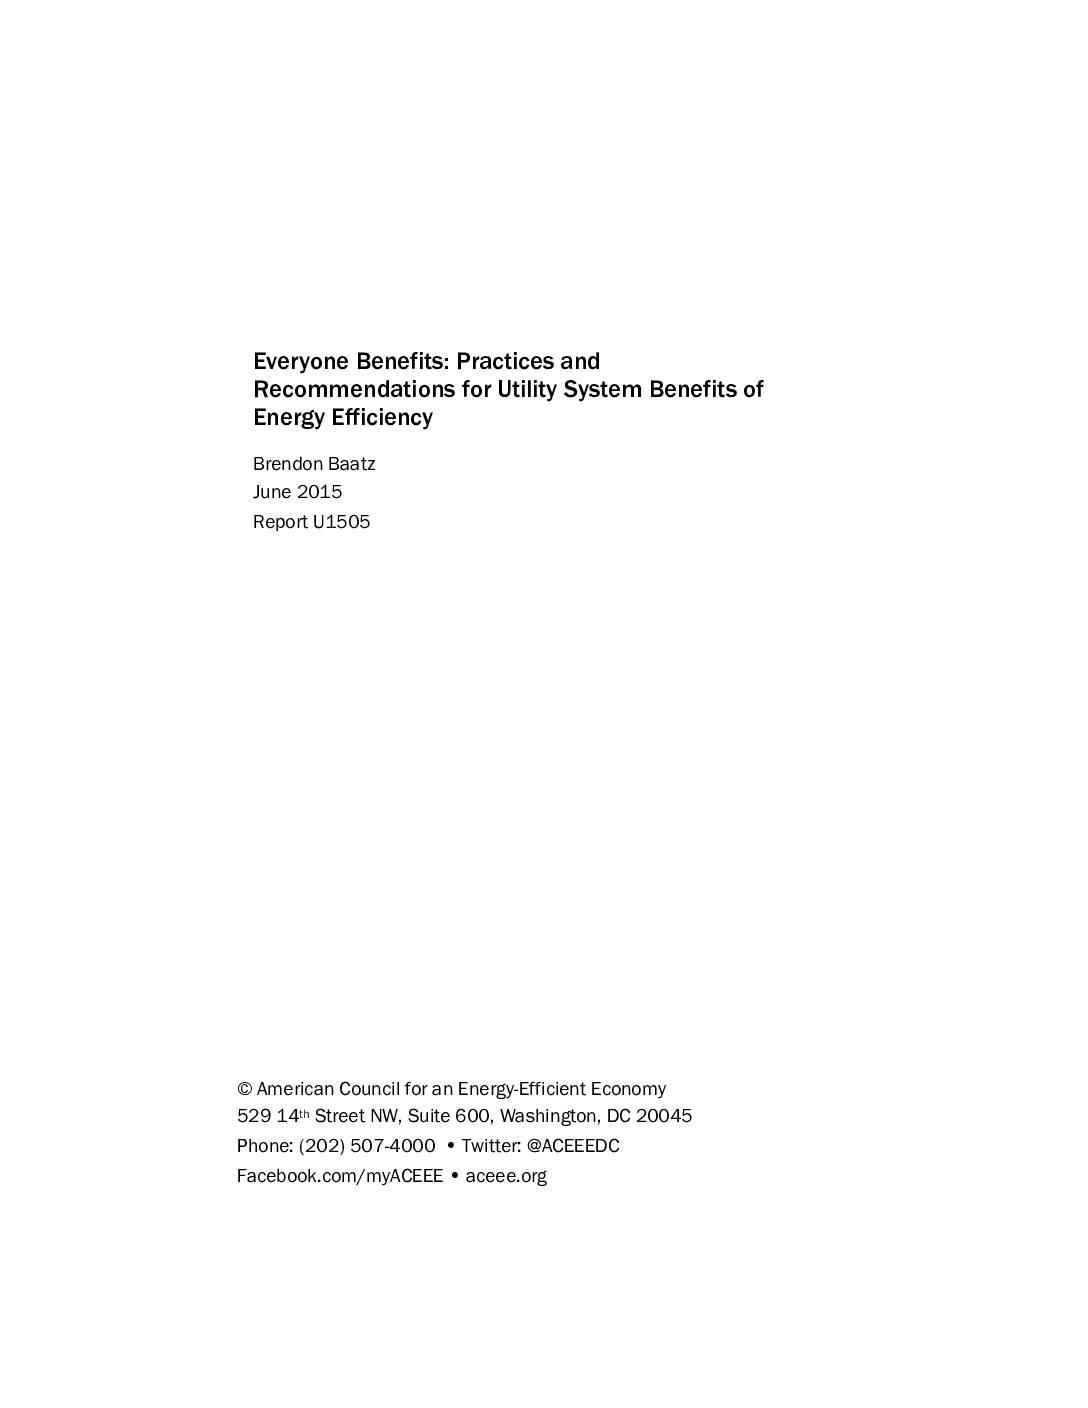 Everyone Benefits: Practices and Recommendations for Utility System Benefits of Energy Efficiency